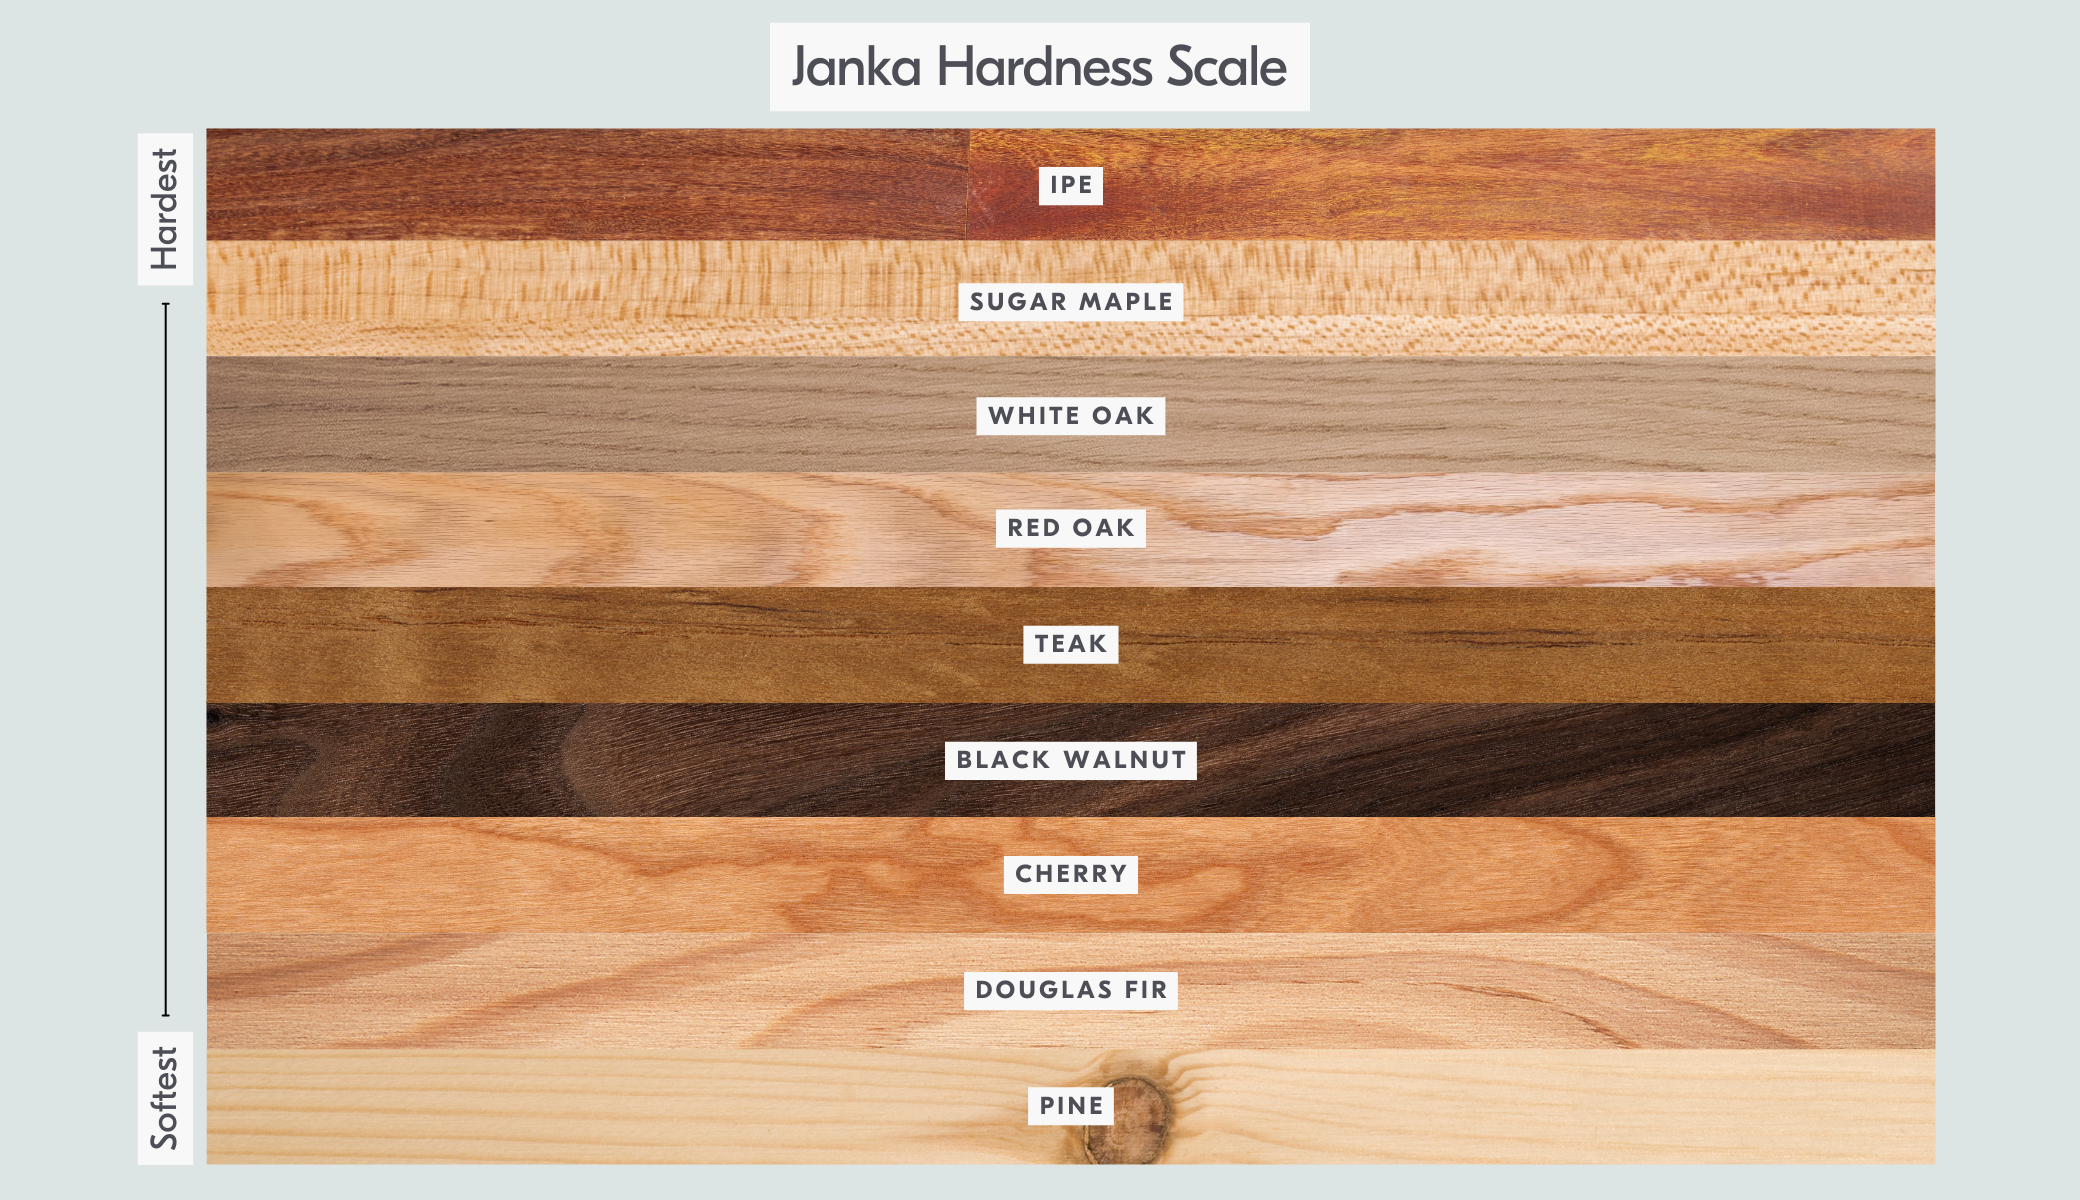 White oak ranks highly on the Janka Hardness Scale, making it a durable species of wood